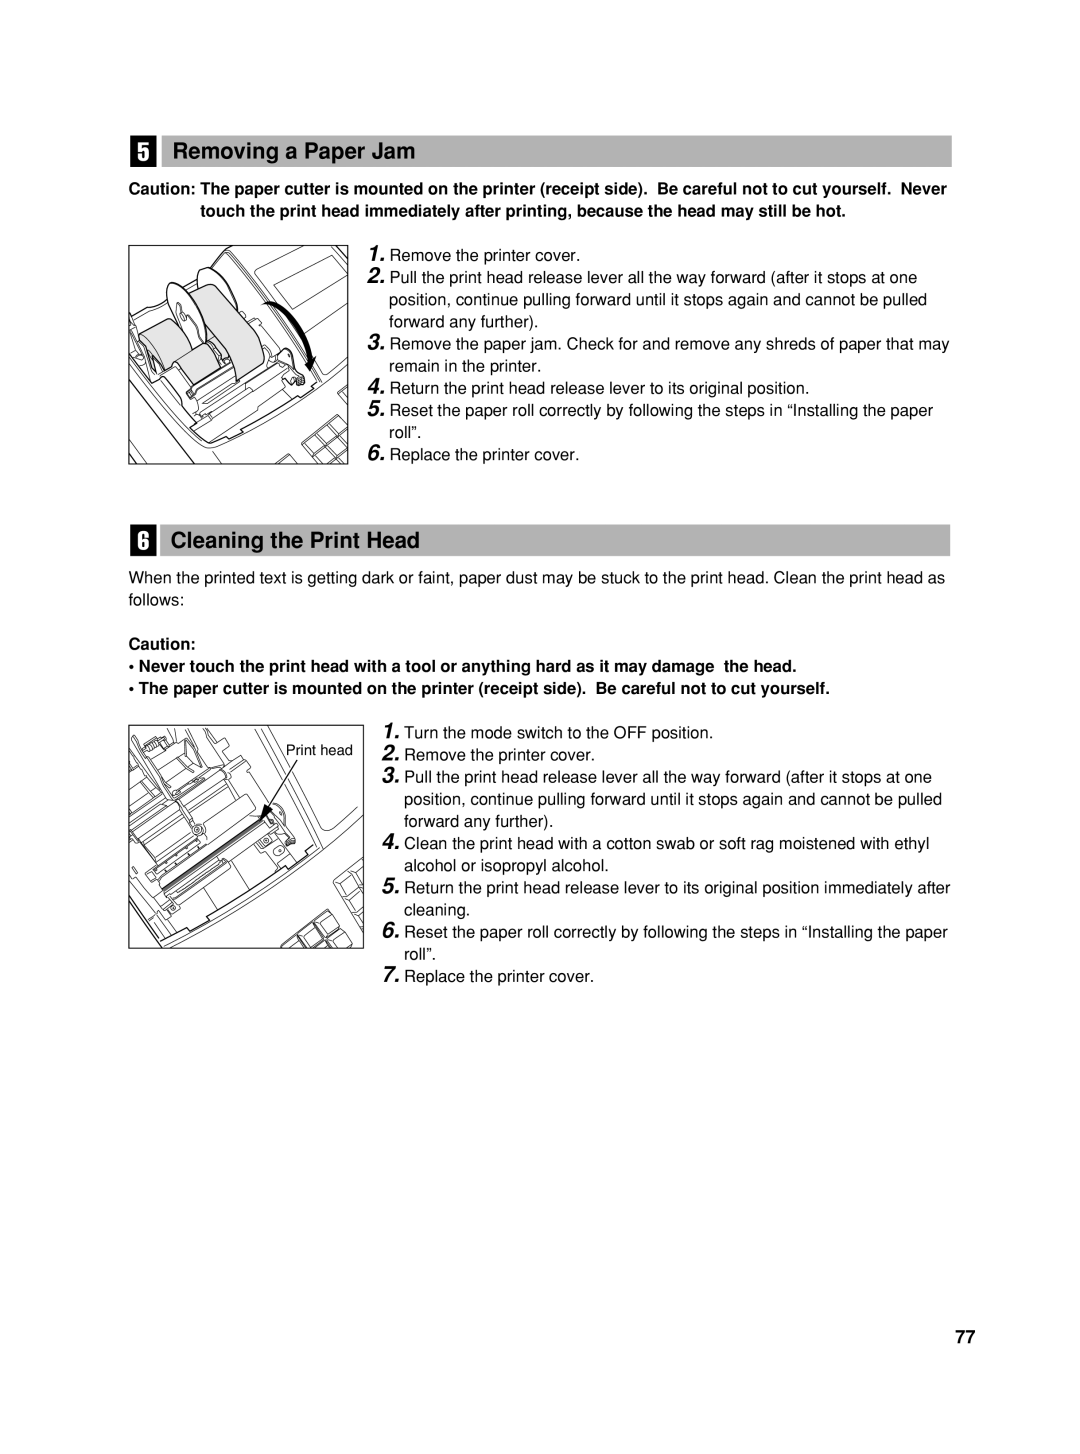 Sharp XE-A42S instruction manual Removing a Paper Jam, Cleaning the Print Head, Print head 